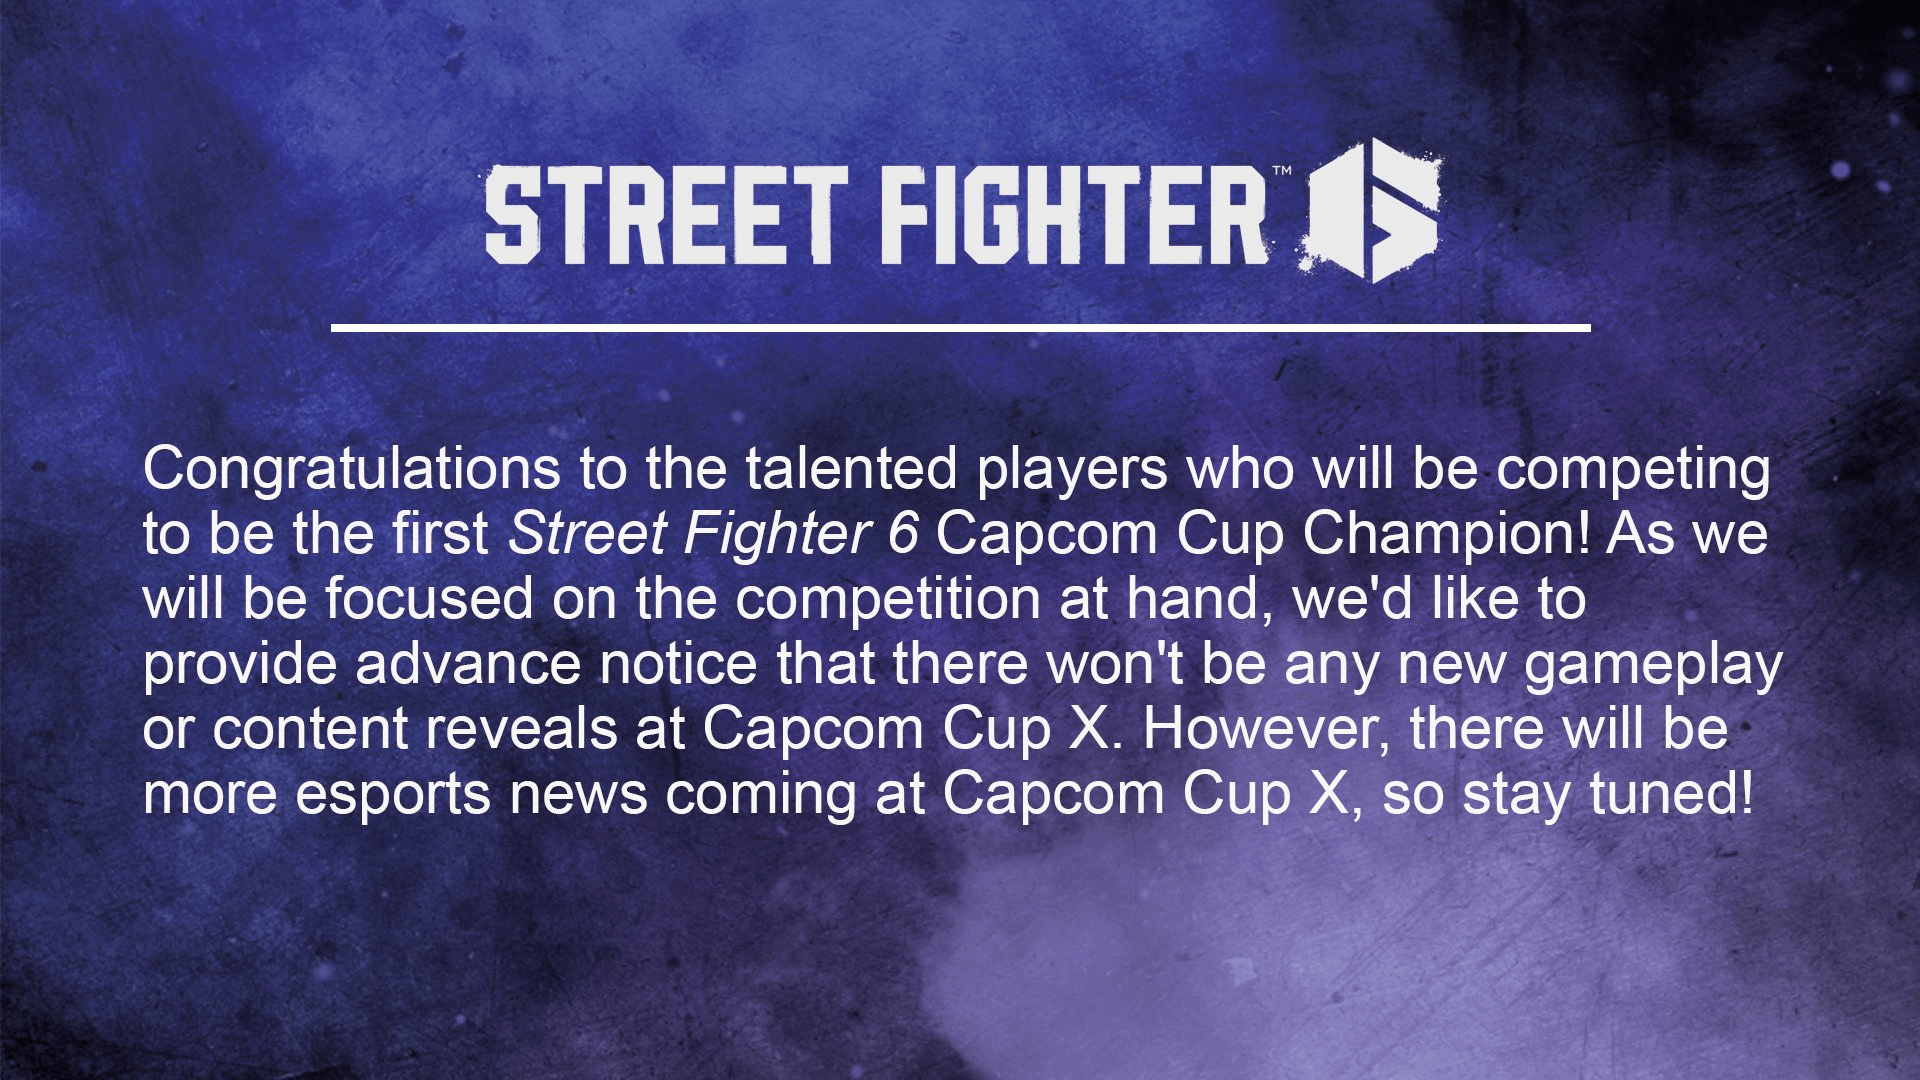 No New Gameplay or Reveals at Capcom Cup X Except For Esports News